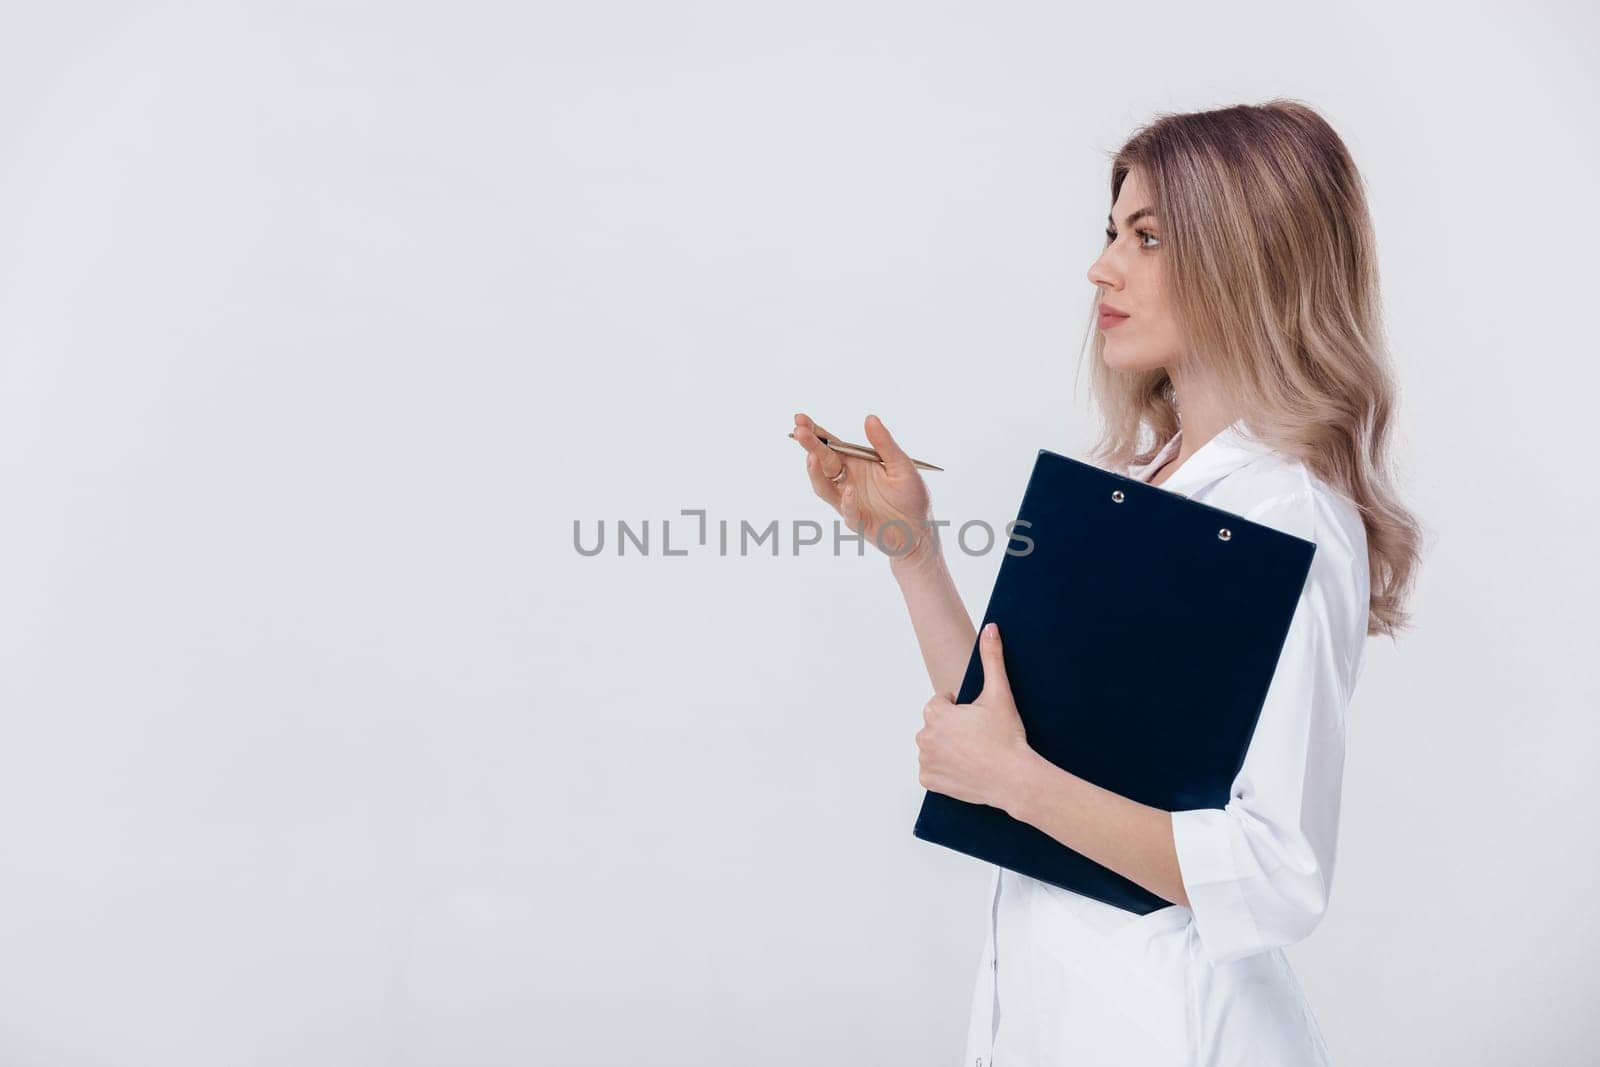 Medical physician doctor woman in white coat holds folder by erstudio